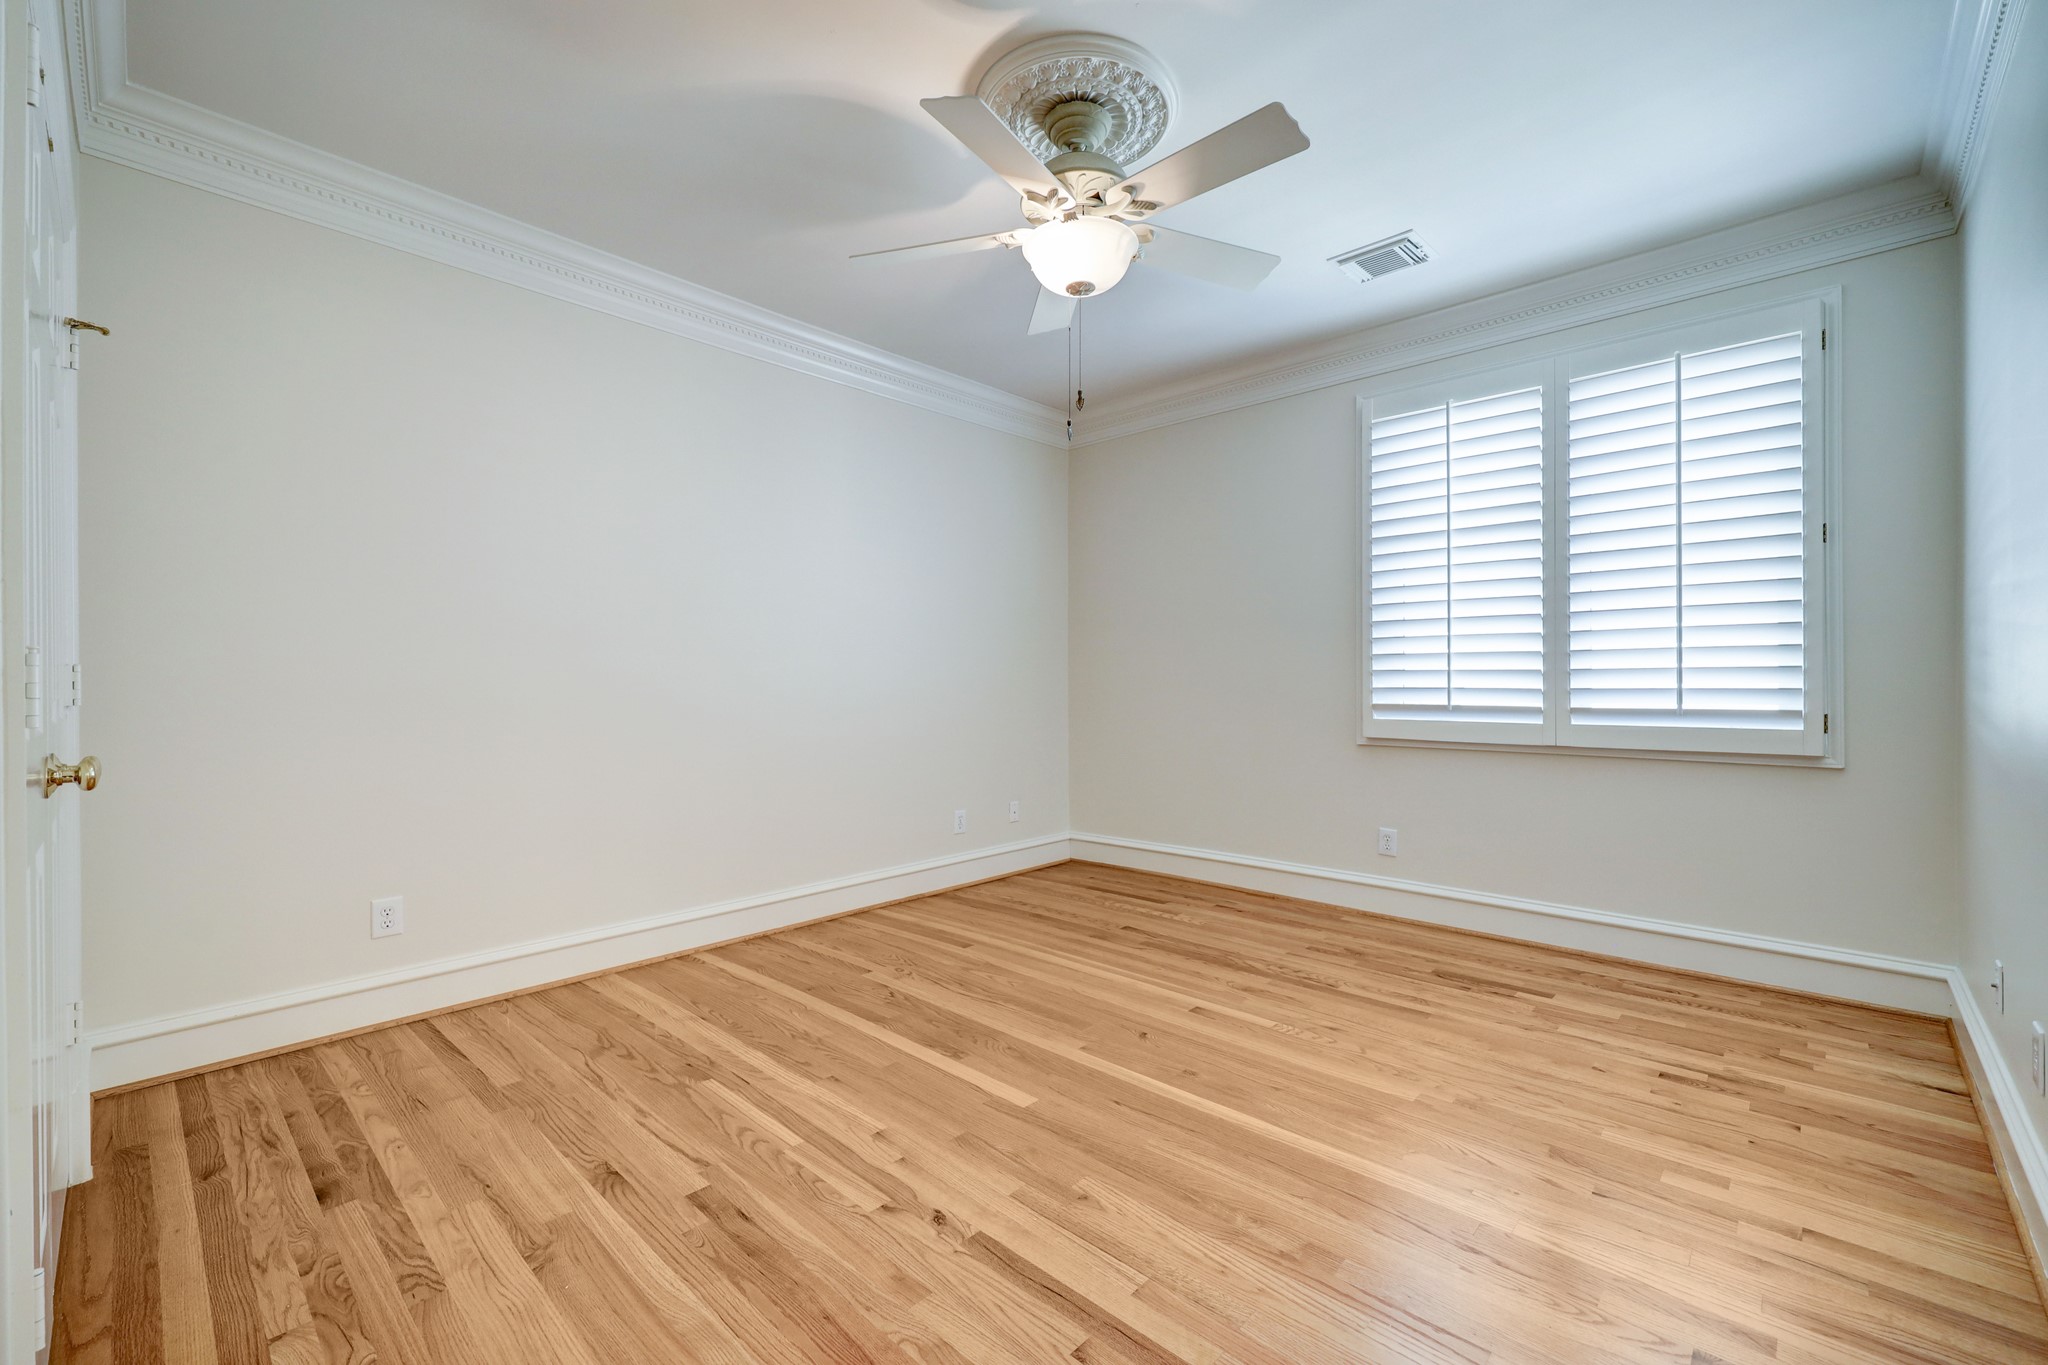 This is bedroom 5 which again has the hardwood flooring, plantation shutters, and nice closet storage.